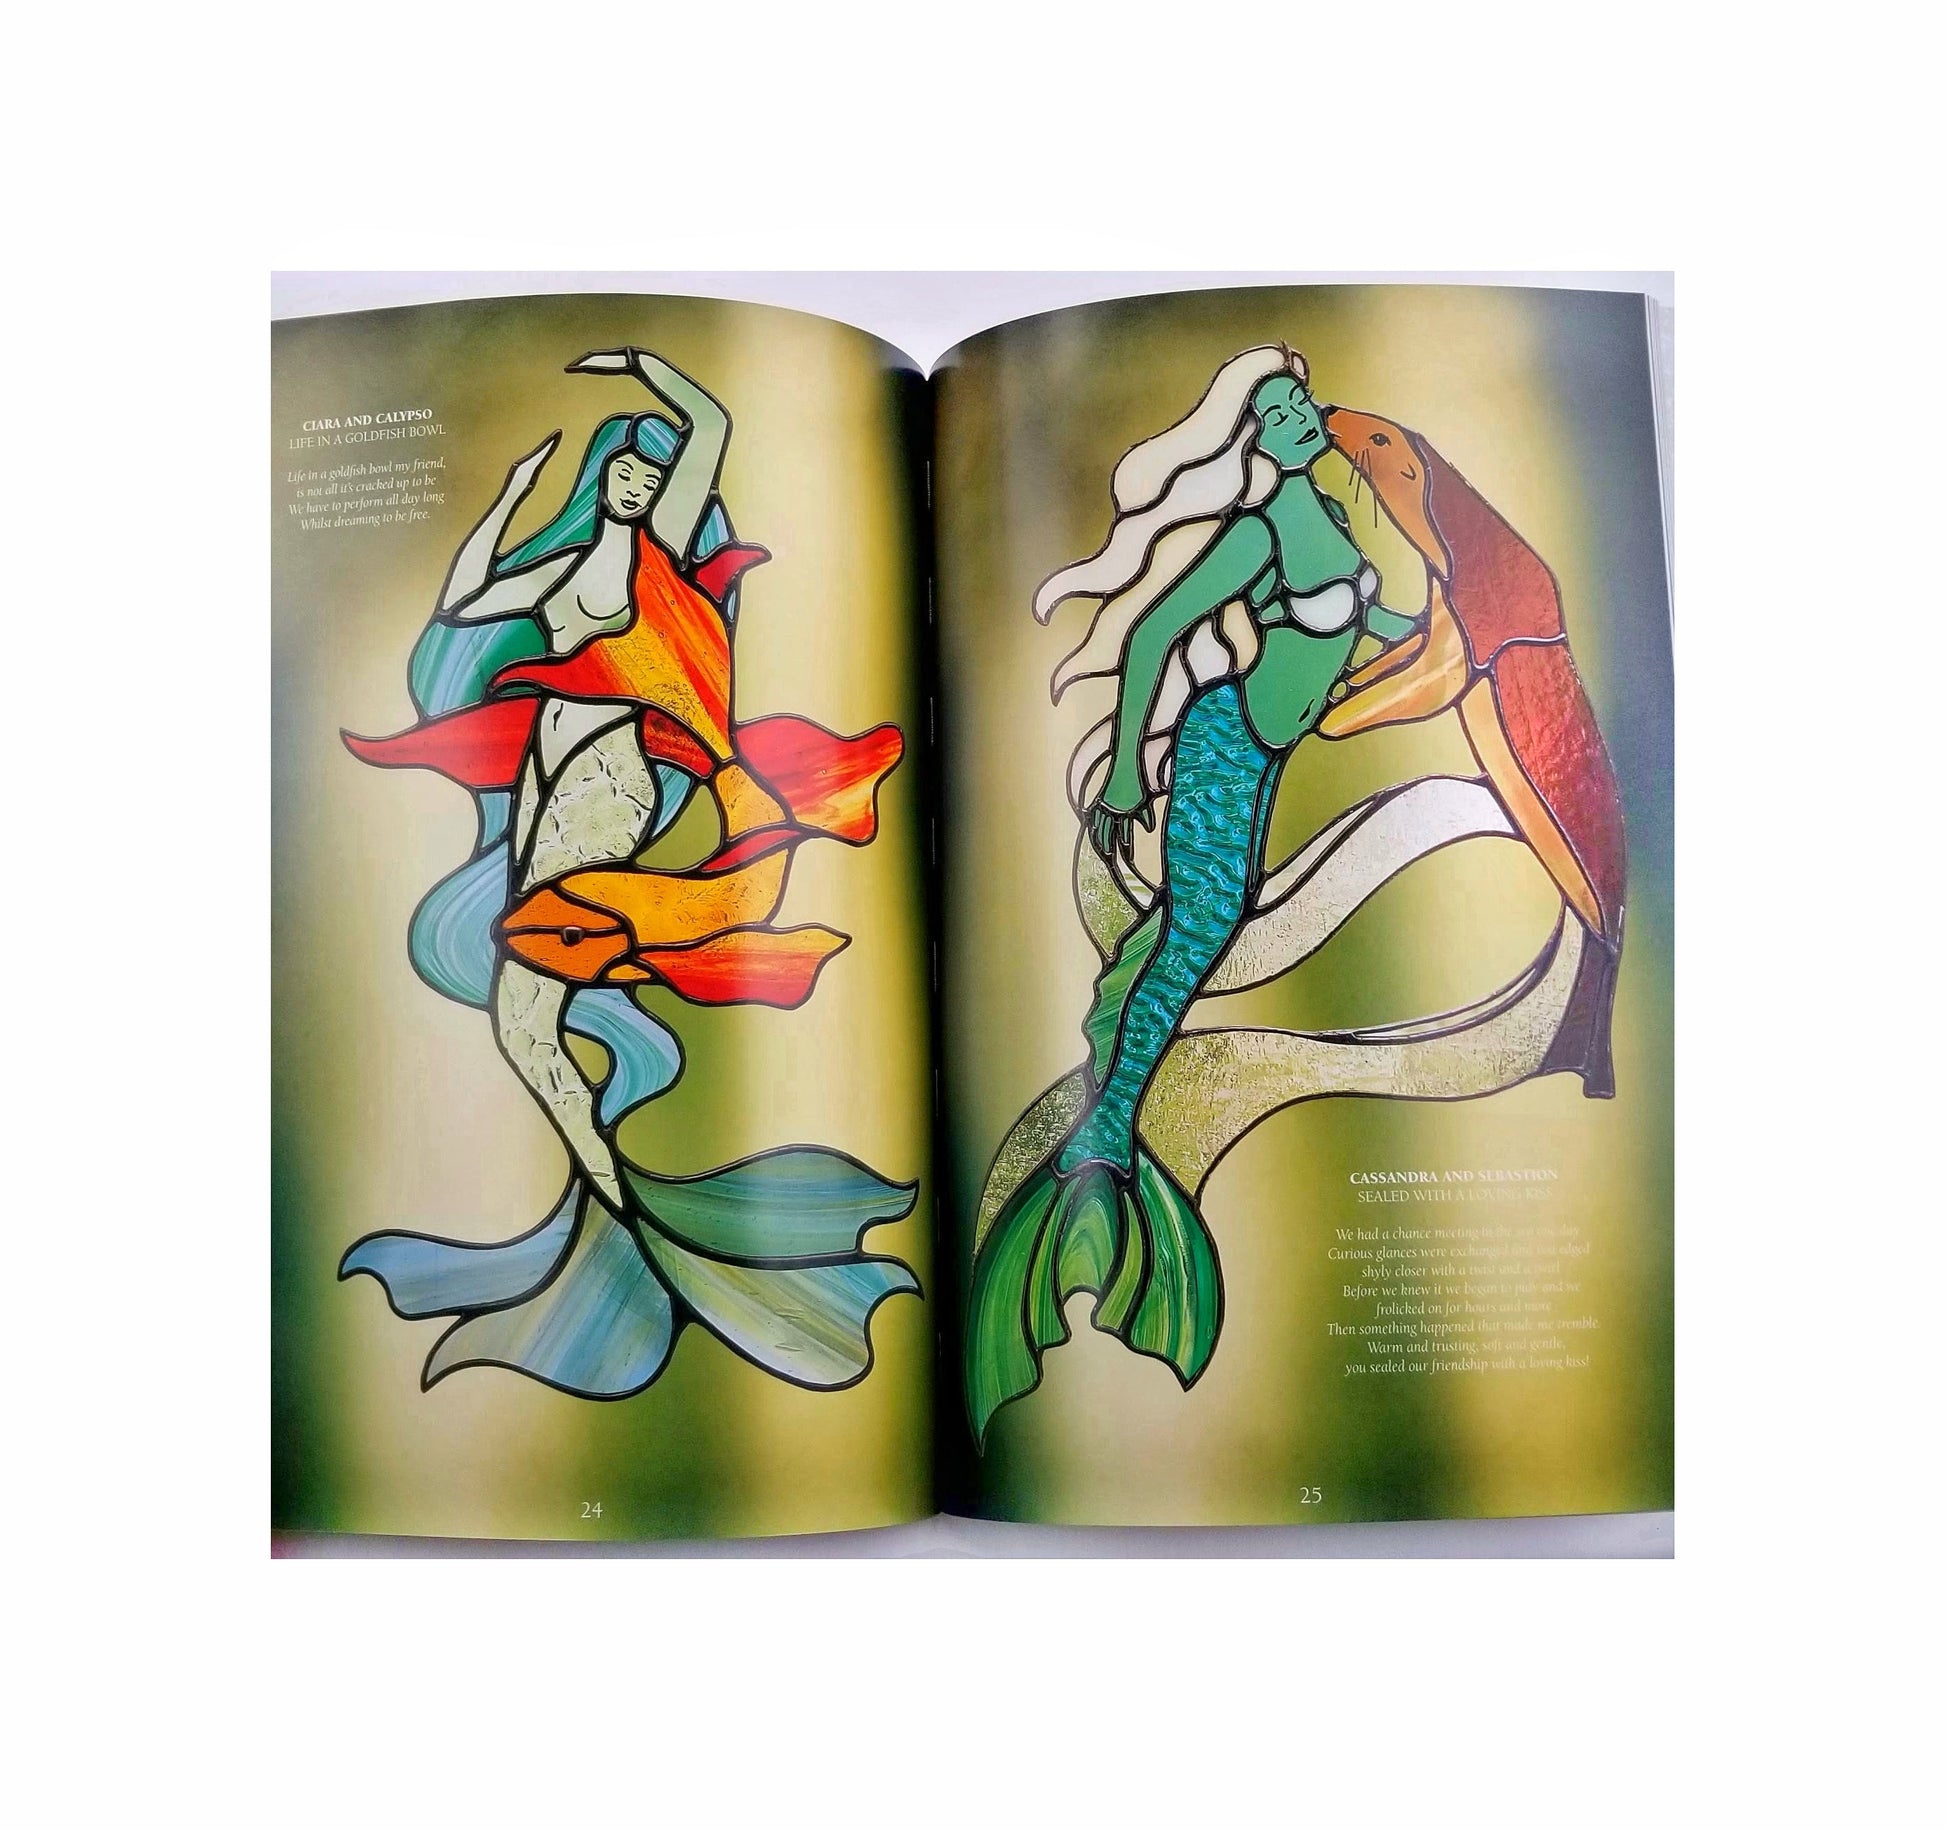 Mermaids Pattern Design Book. Stained Glass, Craft Projects with Beautiful Sea Creatures. Color Photos. Sea Fairies, Jillian Sawyer author.